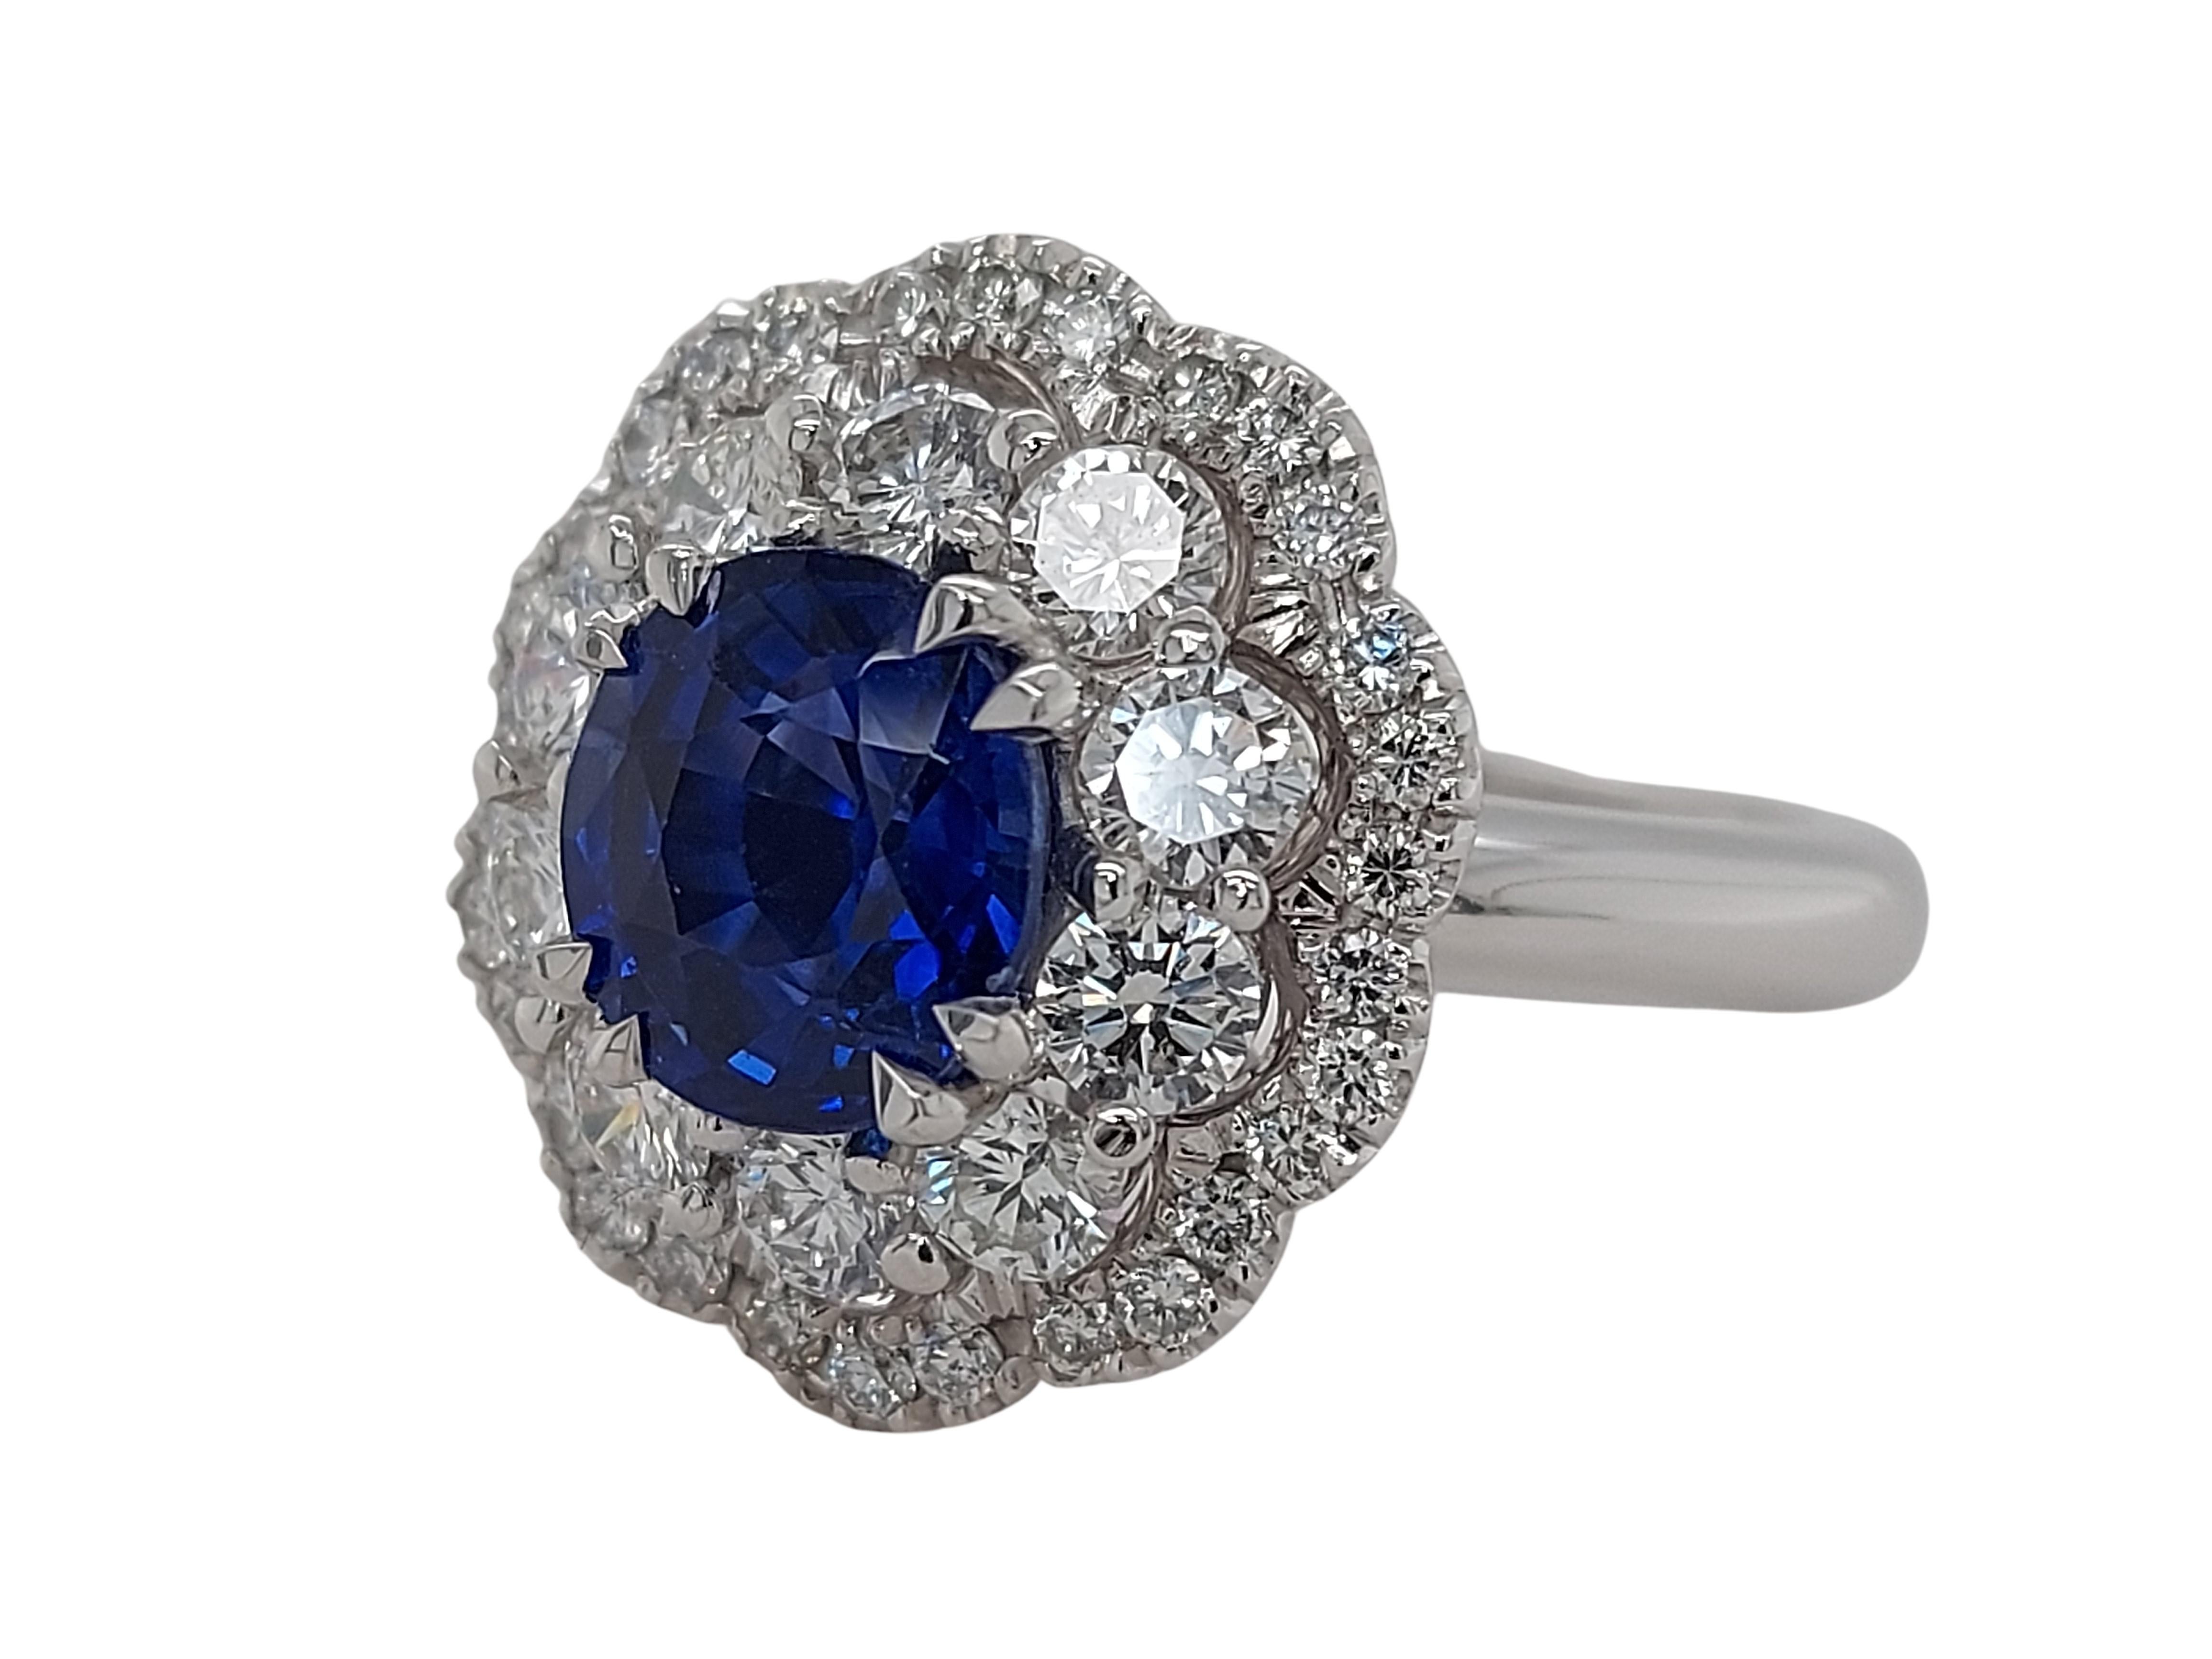 Exceptional 18 kt White Gold Ring with  2.43 ct Sapphire and 1.36 ct Diamonds 

Sapphire: Ceylon ,Oval cut ca. 2.43 ct, of exceptional deep blue color

Diamonds: Brilliant cut ca. 1.36 ct E/F color and VVS Clarity

Material: 18kt white gold

Ring